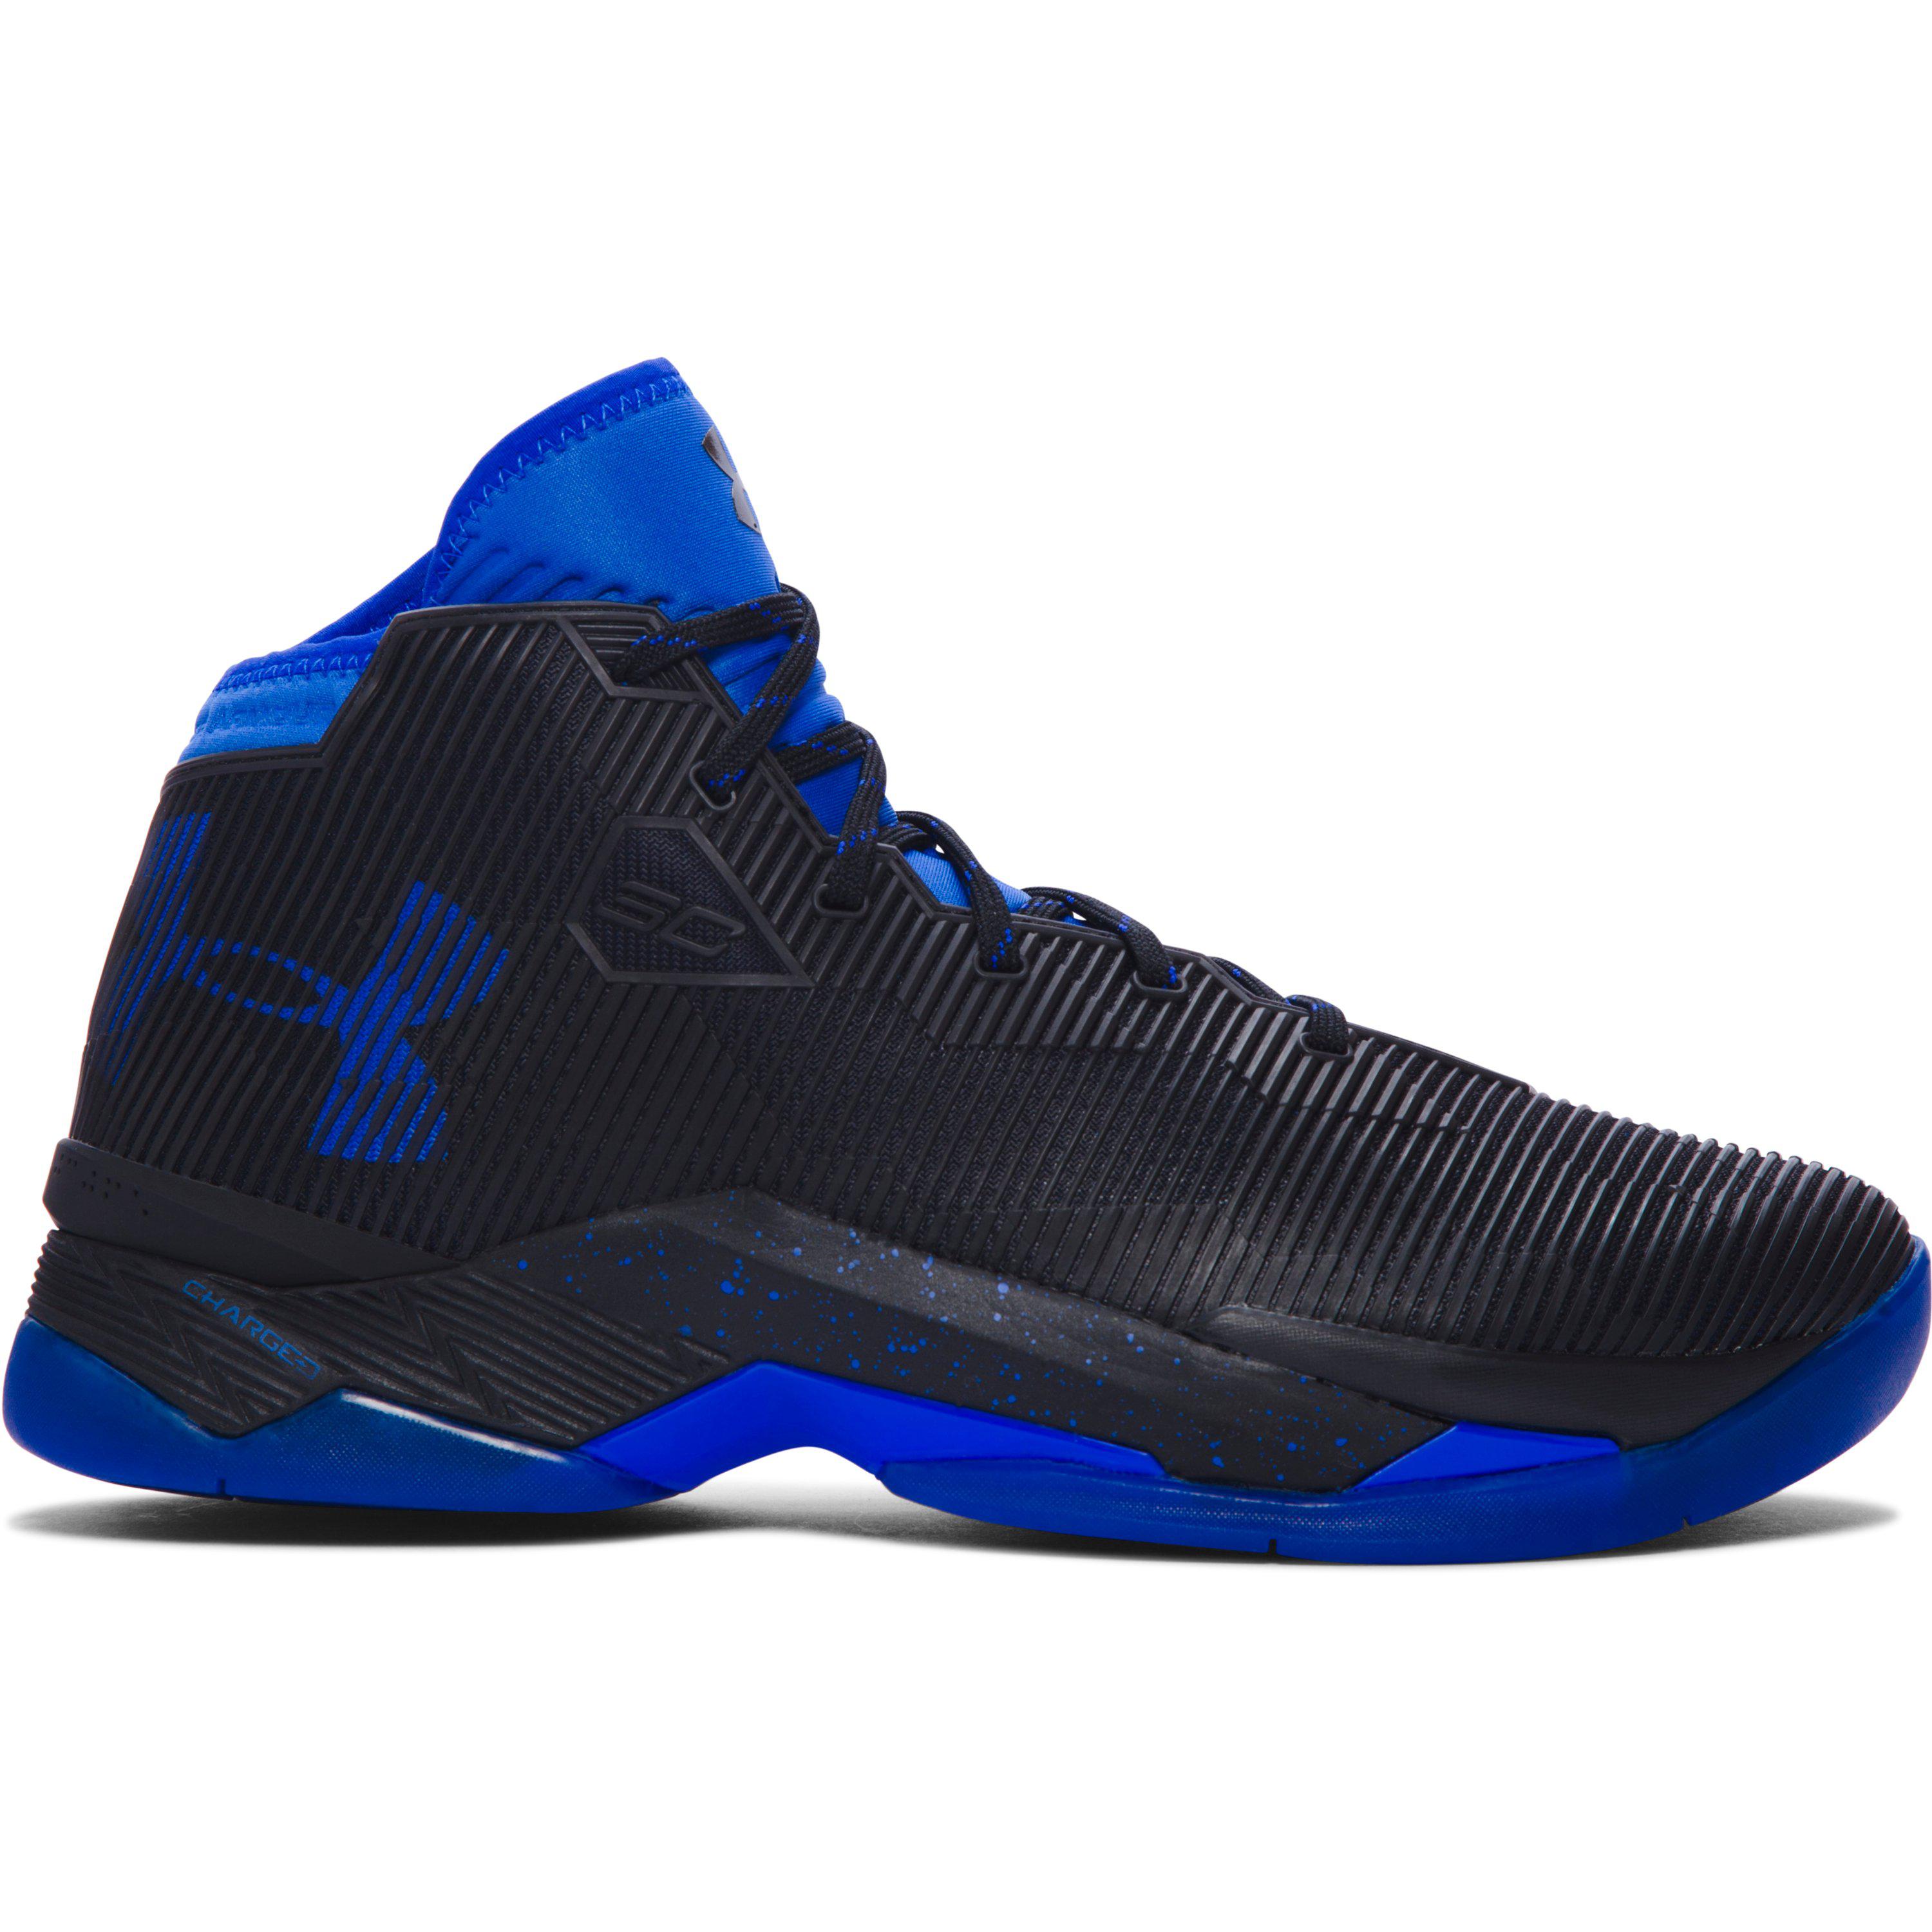 Lyst - Under Armour Men's Ua Curry 2.5 Basketball Shoes in Black for Men